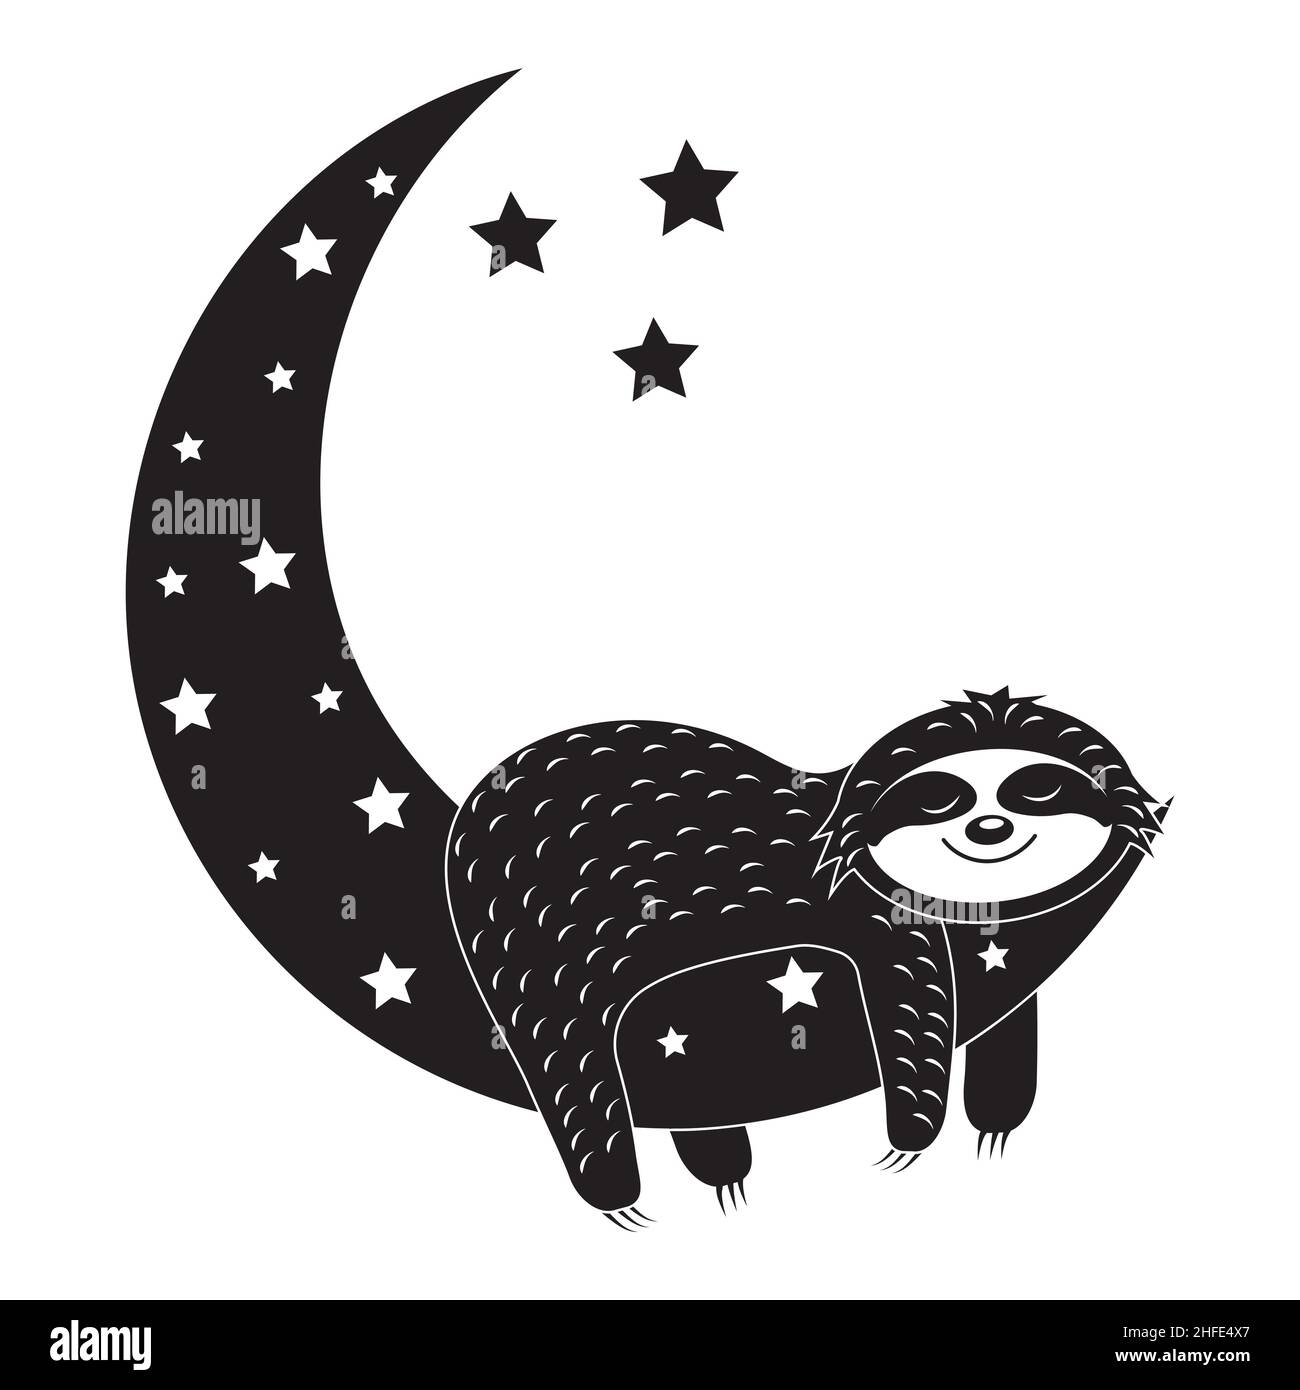 Cute lazy character sleeping on the Moon, black stencil isolated illustration Stock Vector